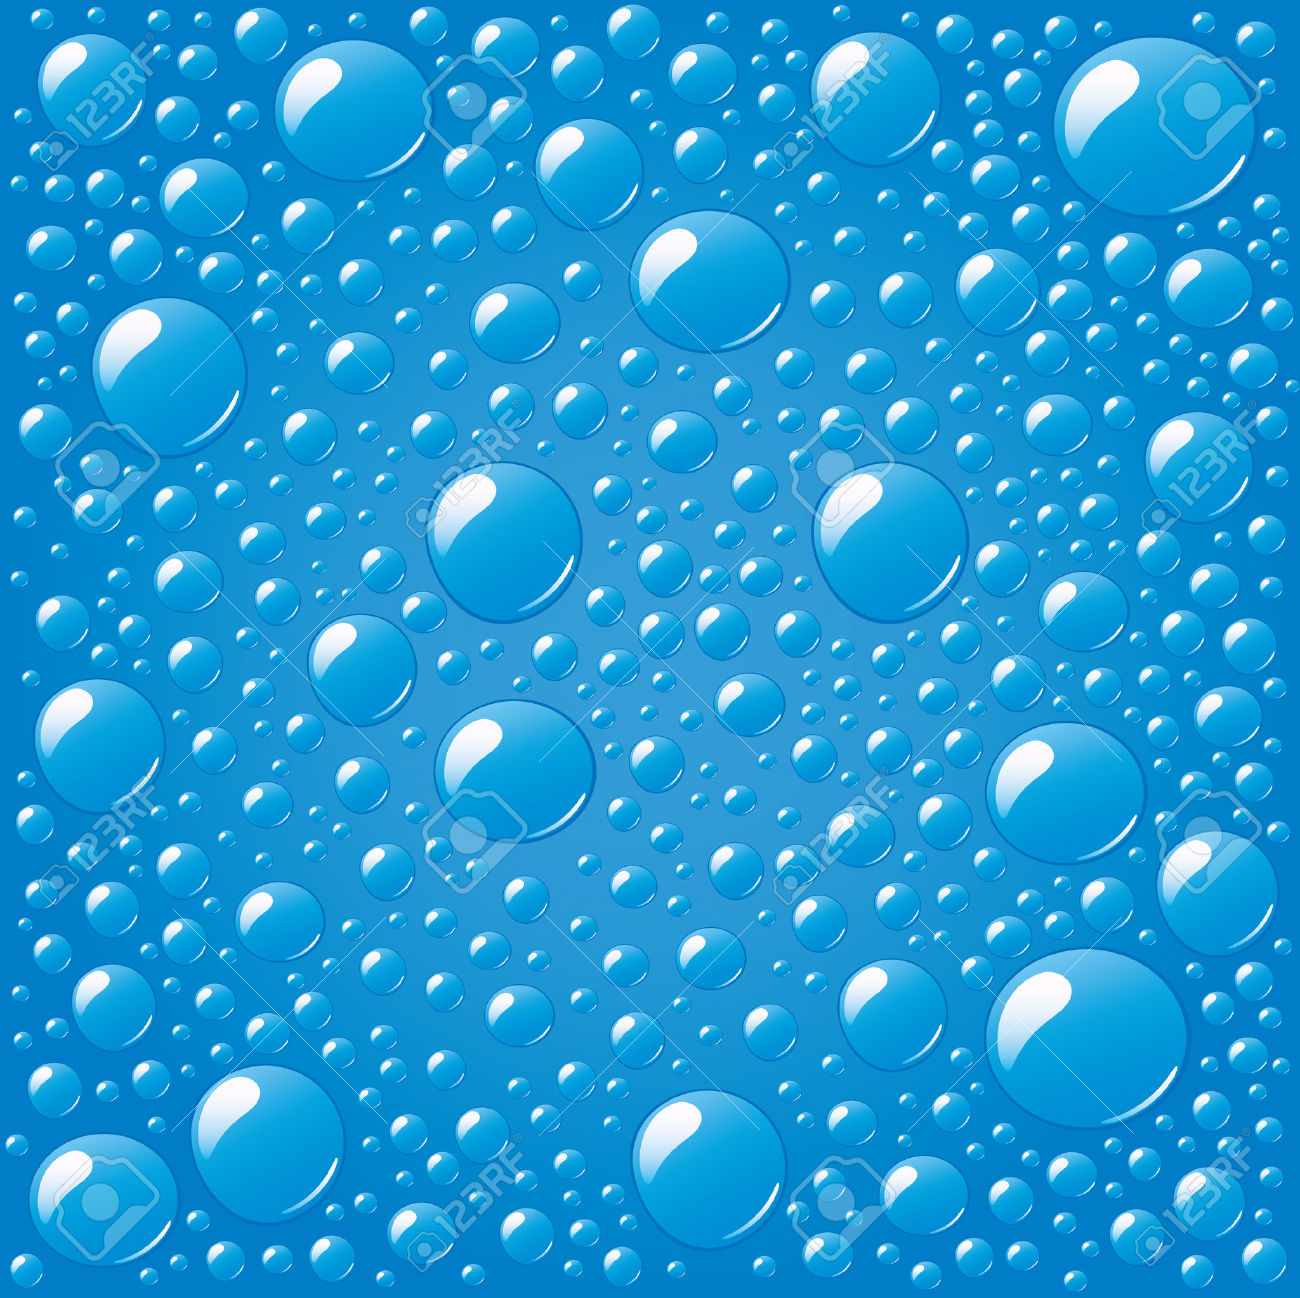 Free Water Background Cliparts, Download Free Clip Art, Free